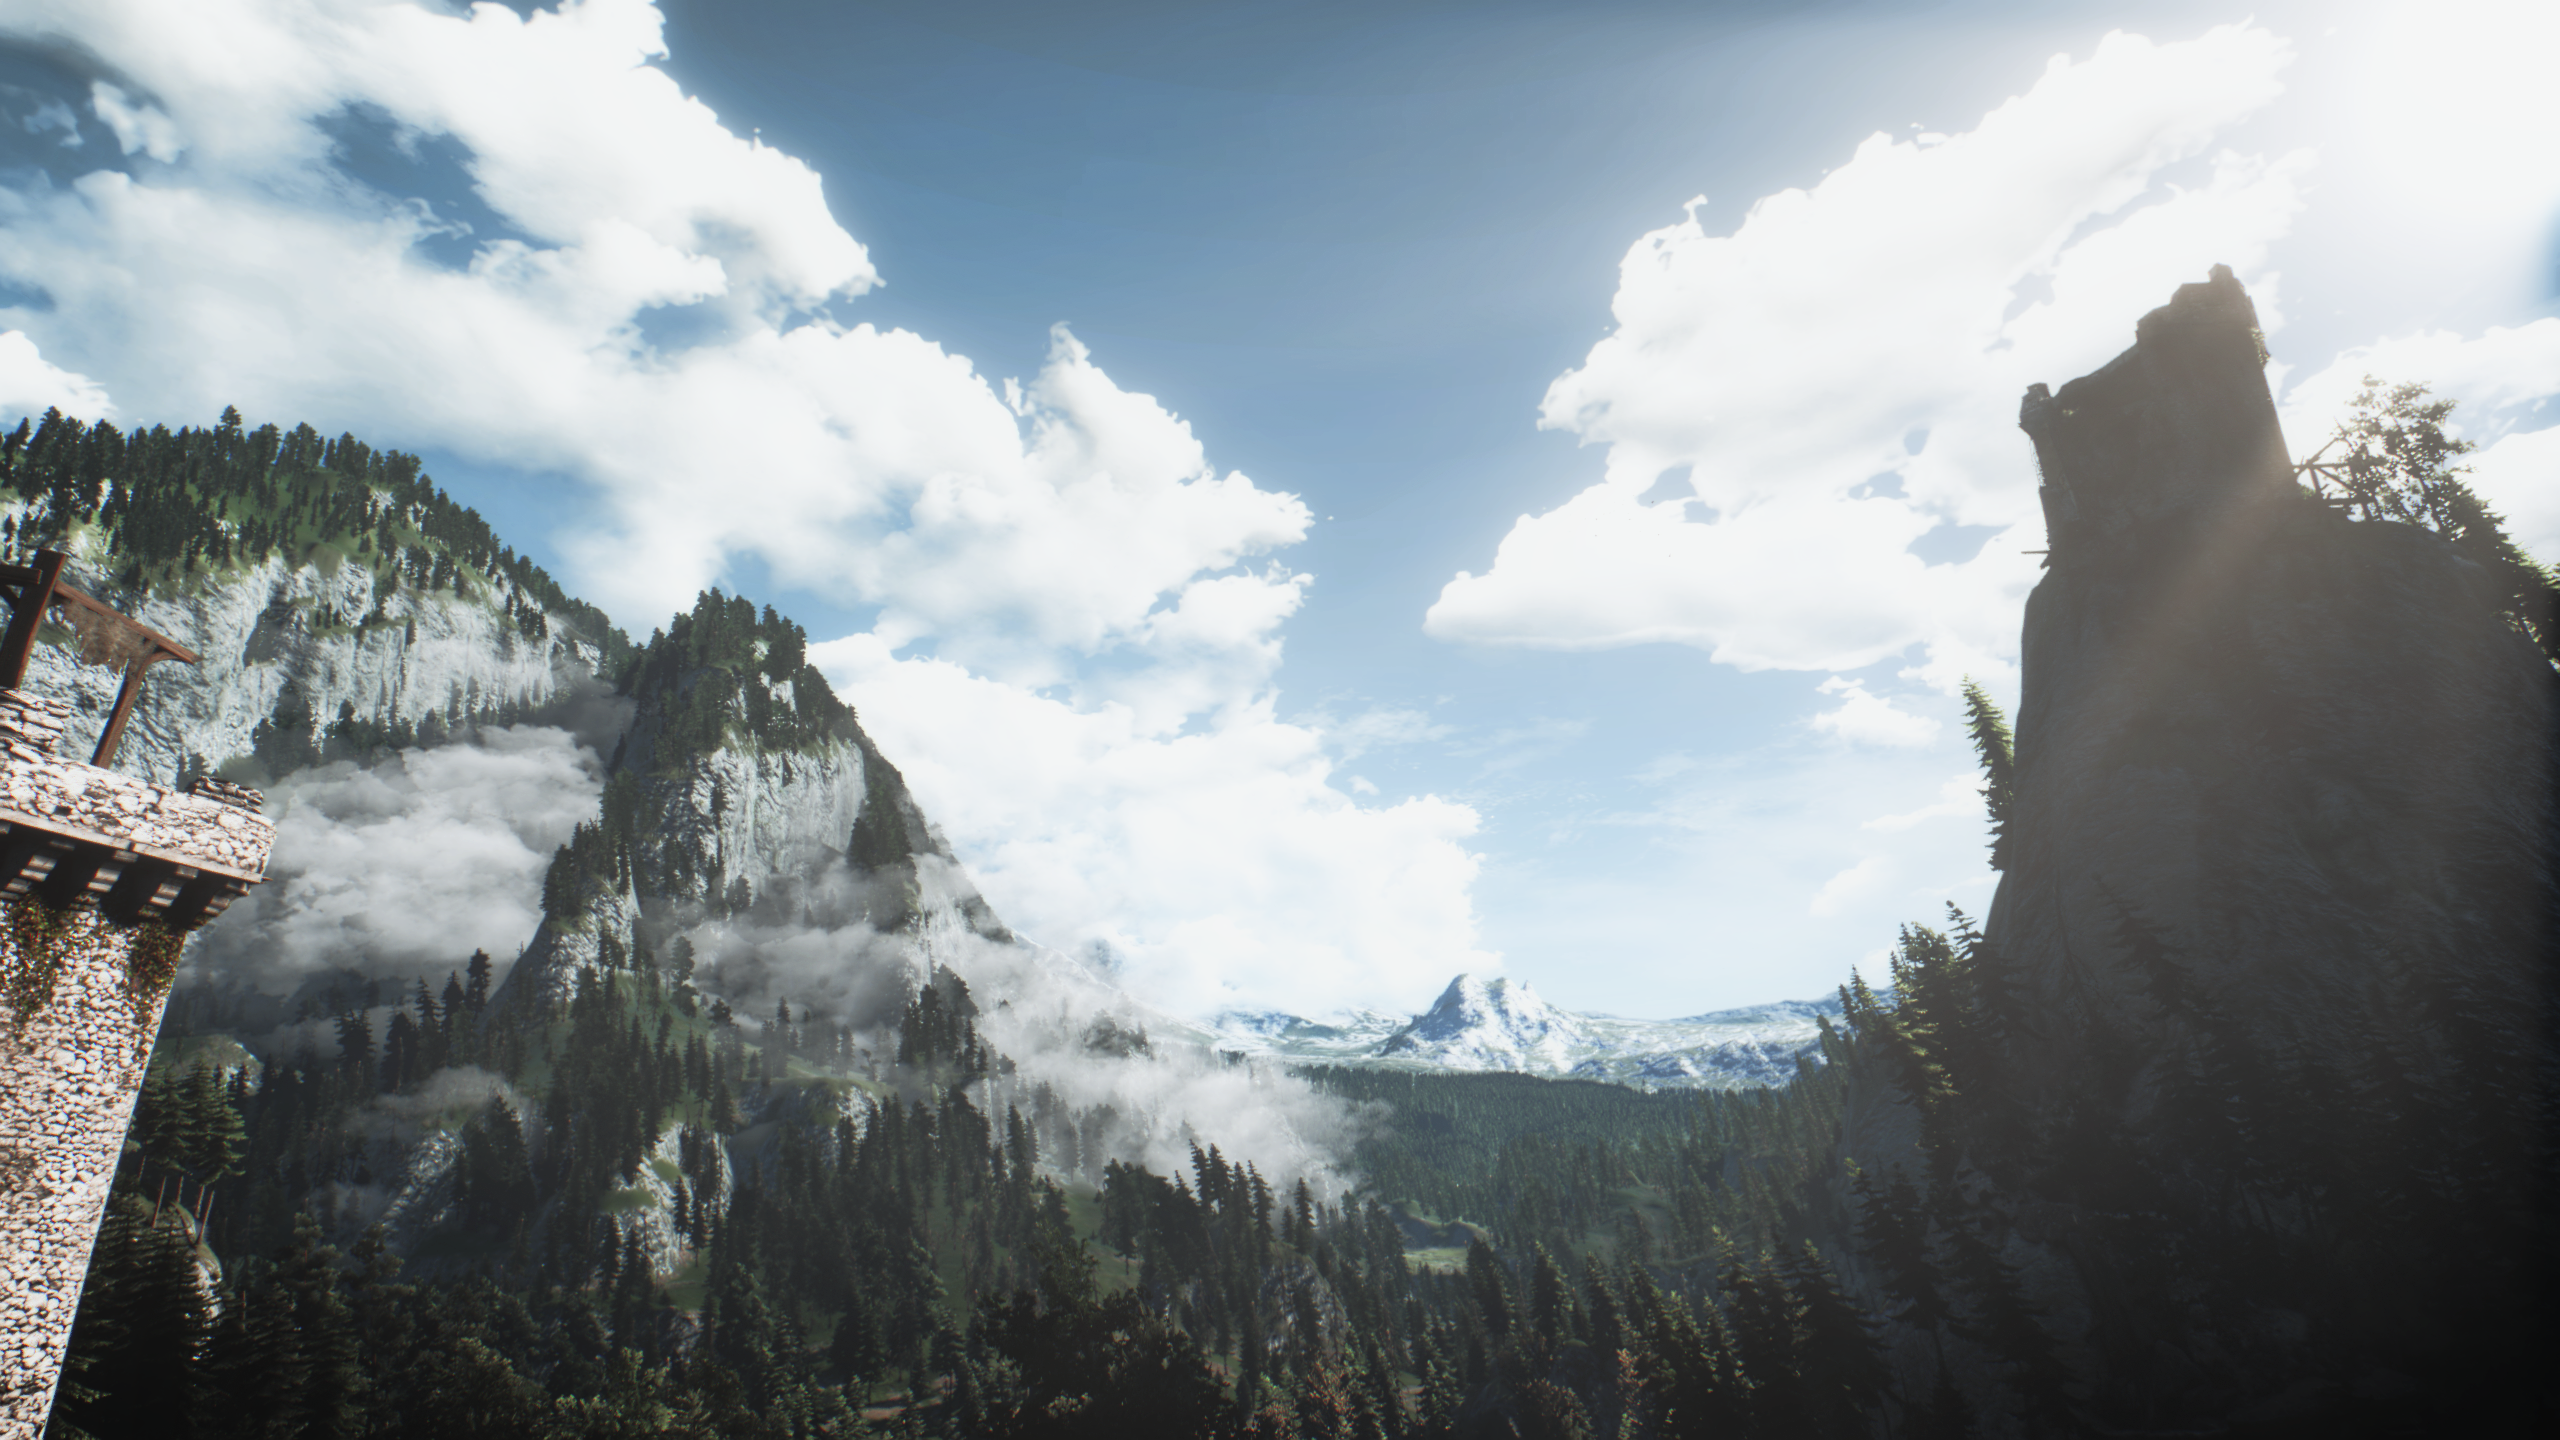 The Witcher The Witcher 3 Wild Hunt Kaer Morhen 2560x1440